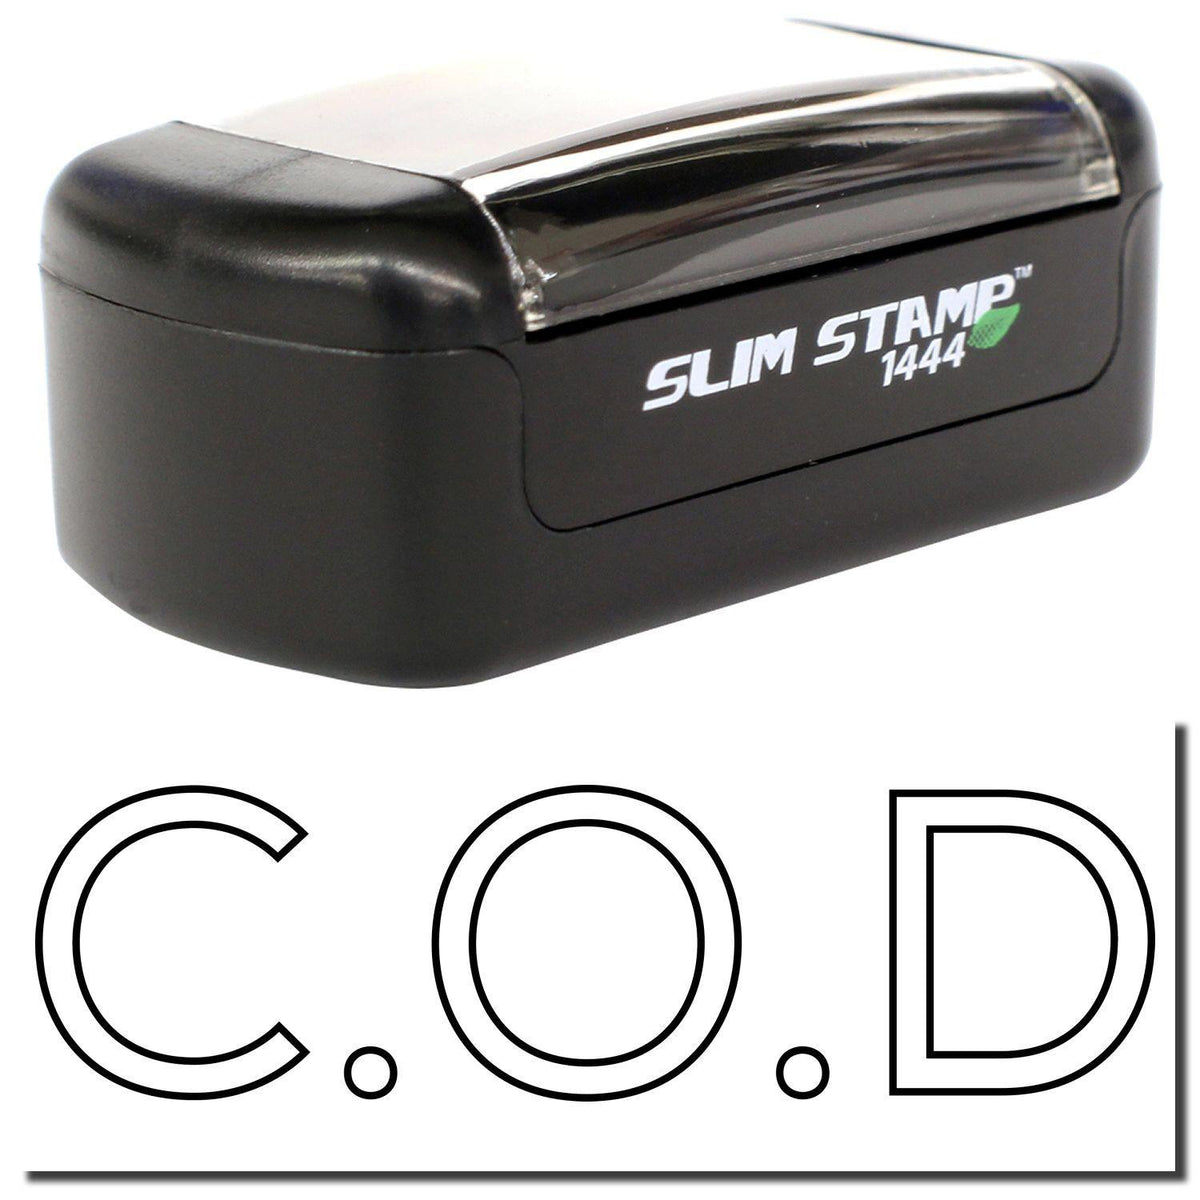 A stock office pre-inked stamp with a stamped image showing how the text &quot;C.O.D&quot; in an outline style is displayed after stamping.